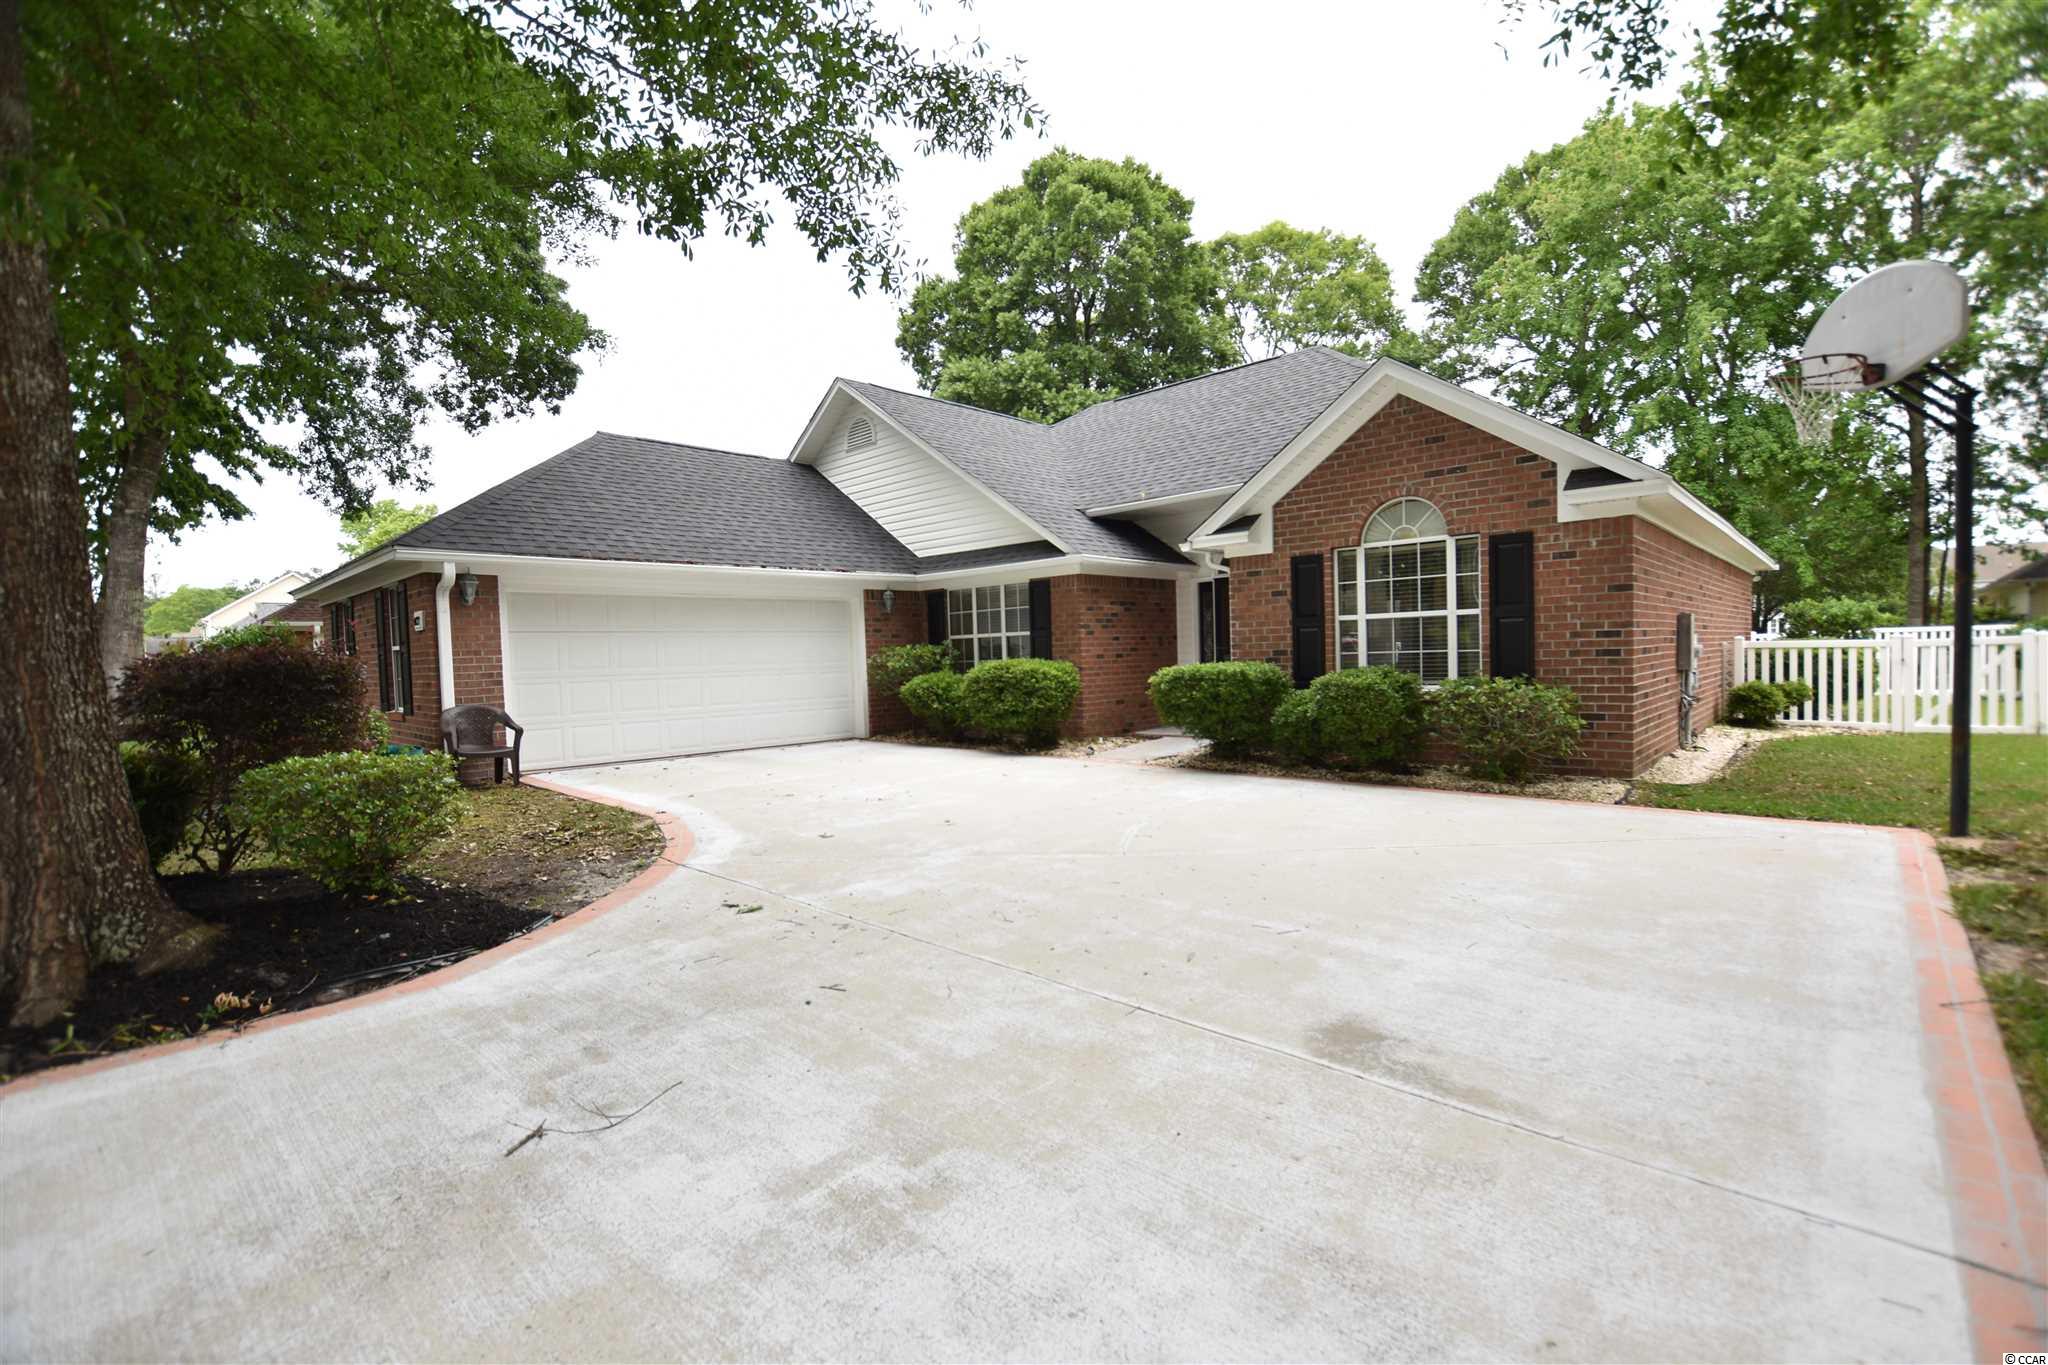 4122 Steeple Chase Dr. Myrtle Beach, SC 29588